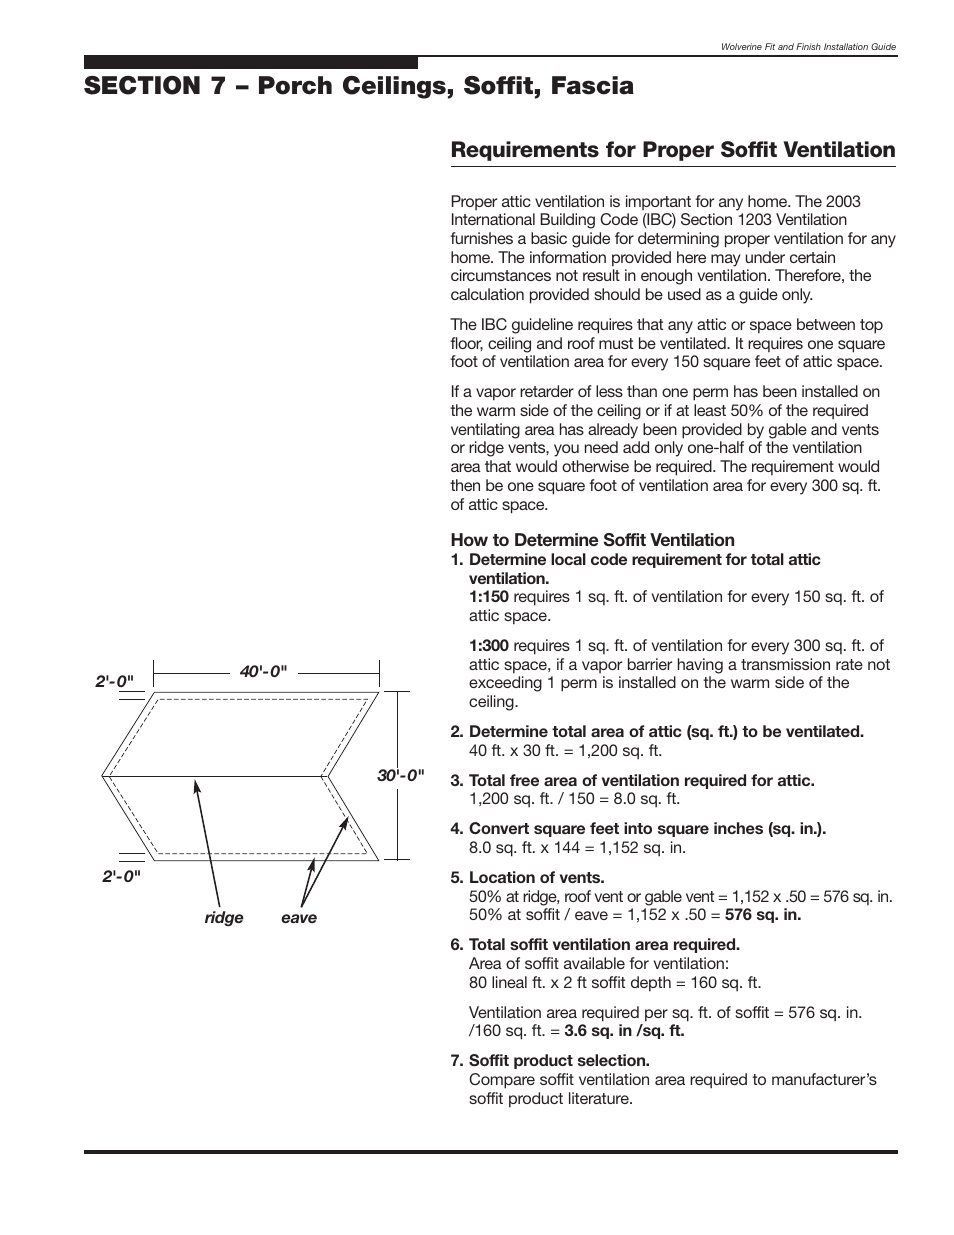 Requirements for proper soffit ventilation Wolverine Siding and Vinyl Carpentry Soffit and